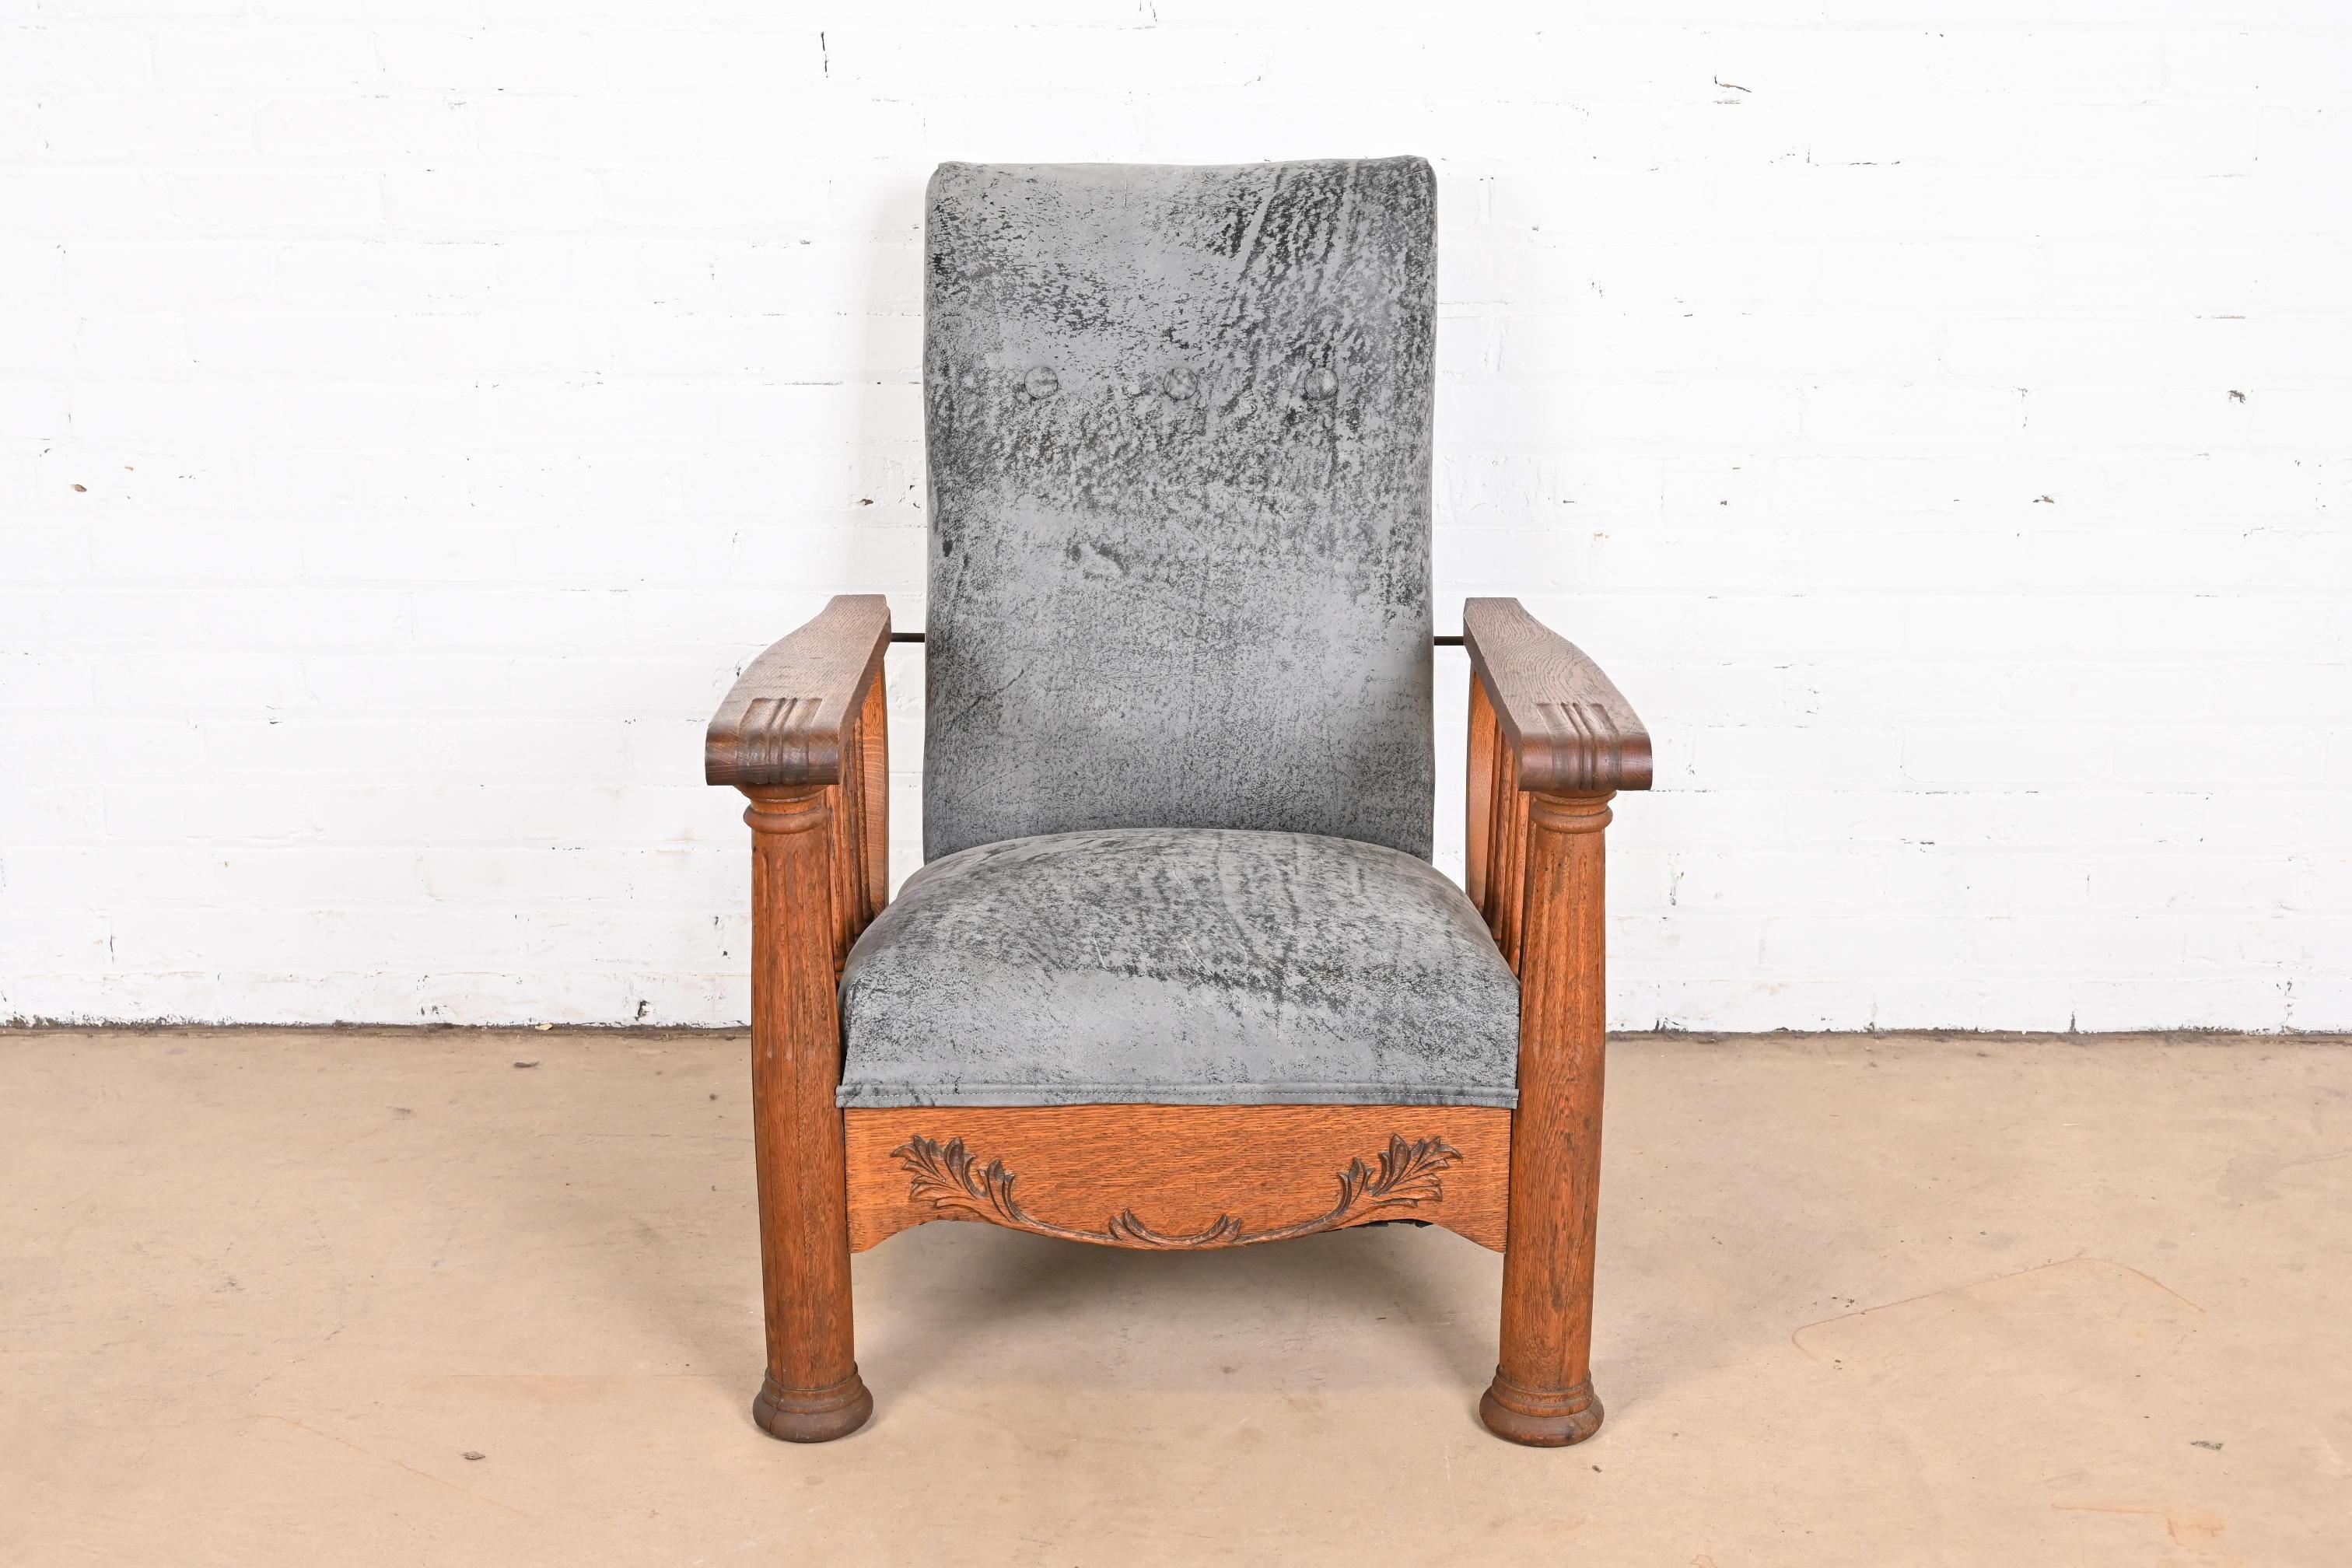 A gorgeous Mission or Arts & Crafts Morris reclining lounge chair

In the manner of Stickley

USA, Early 20th century

Carved oak frame, with newer intentionally distressed blue gray leather upholstery.

Measures: 28.5